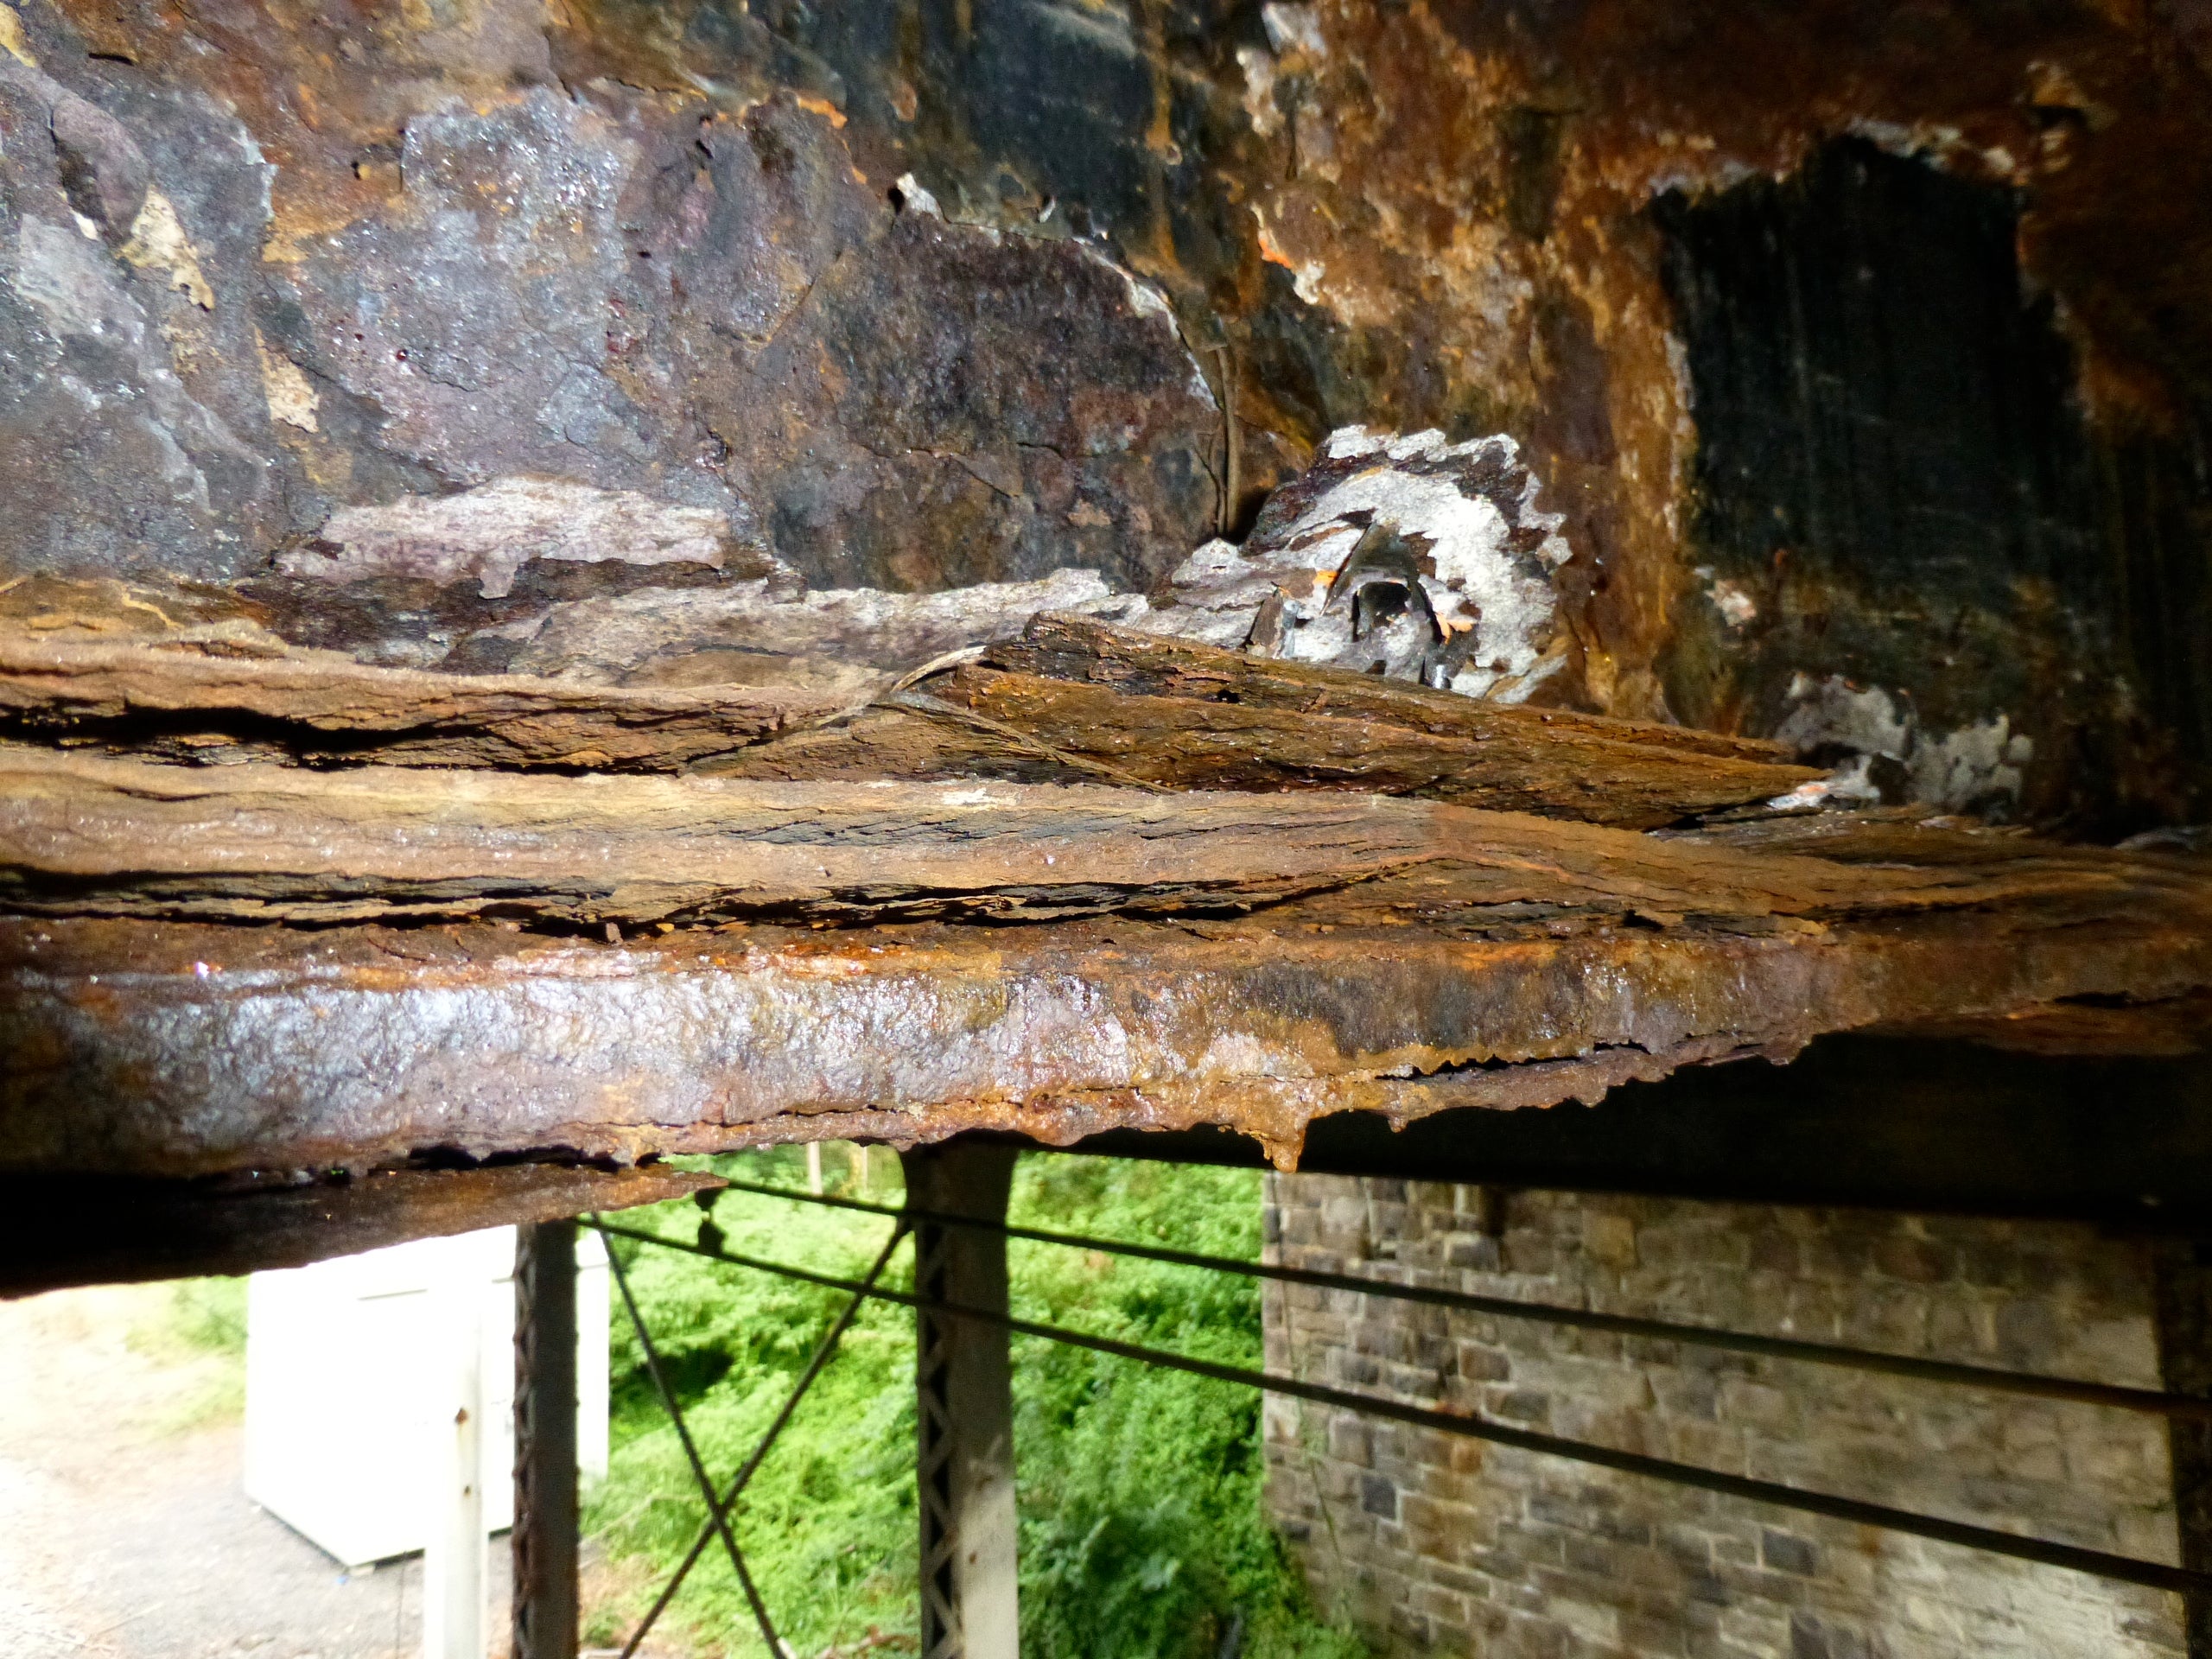 Willow Grove Ave Bridge corrosion, photo courtesy of the Streets Dept.